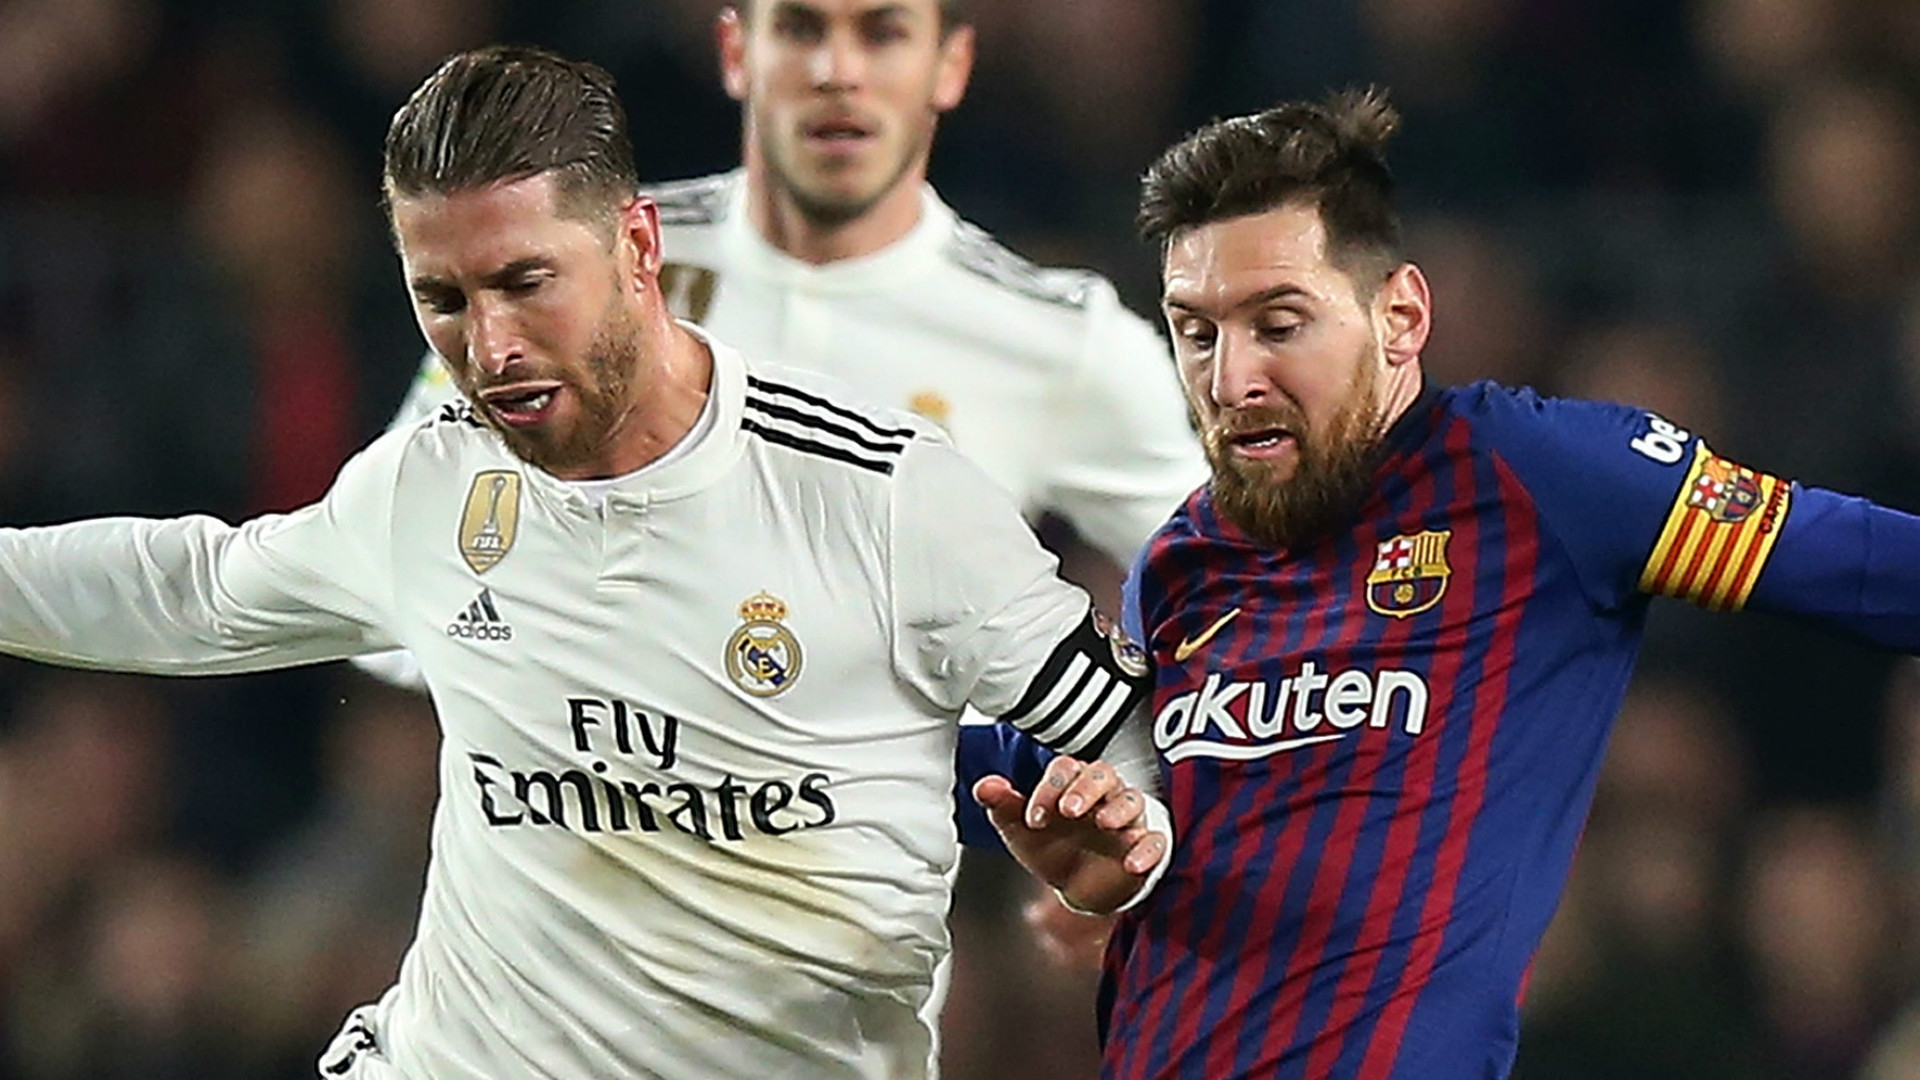 1920x1080 Real Madrid vs Barcelona: El Clasico is the game that changes the world, says Patrick Kluivert